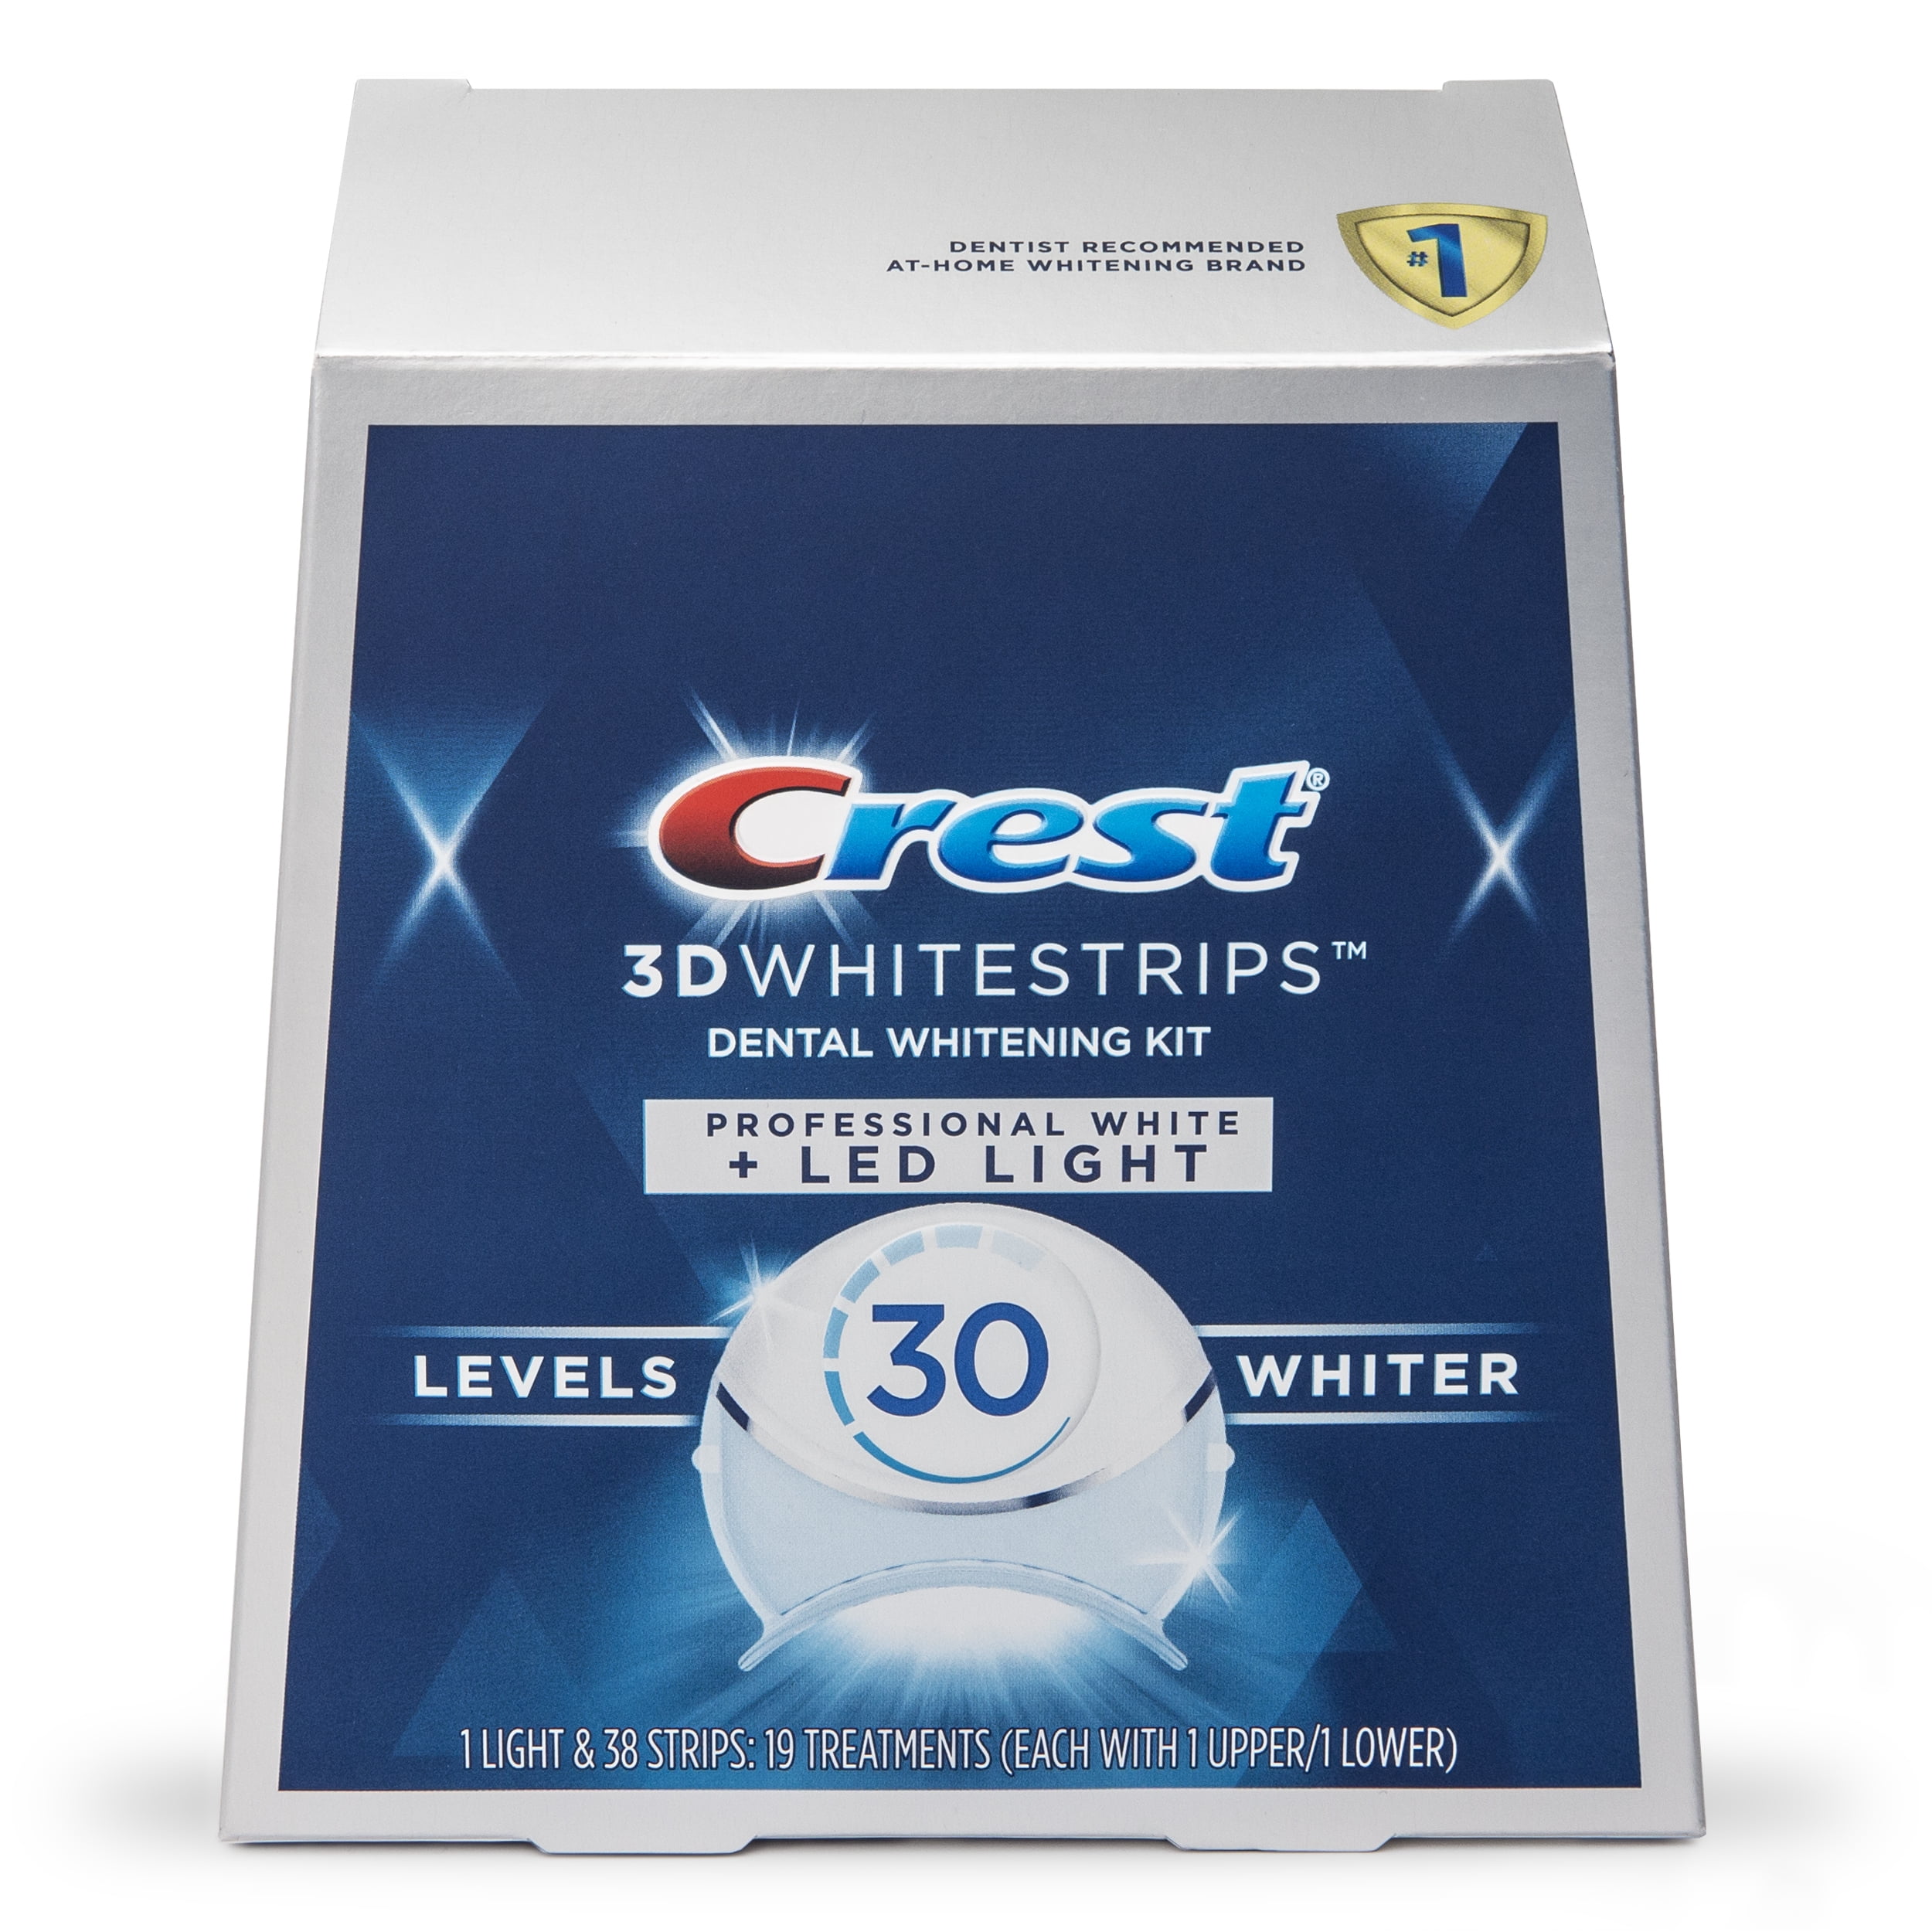 Crest 3DWhitestrips Professional White with LED Accelerator Light At-home  Teeth Whitening Kit, 19 Treatments, 30 Levels Whiter